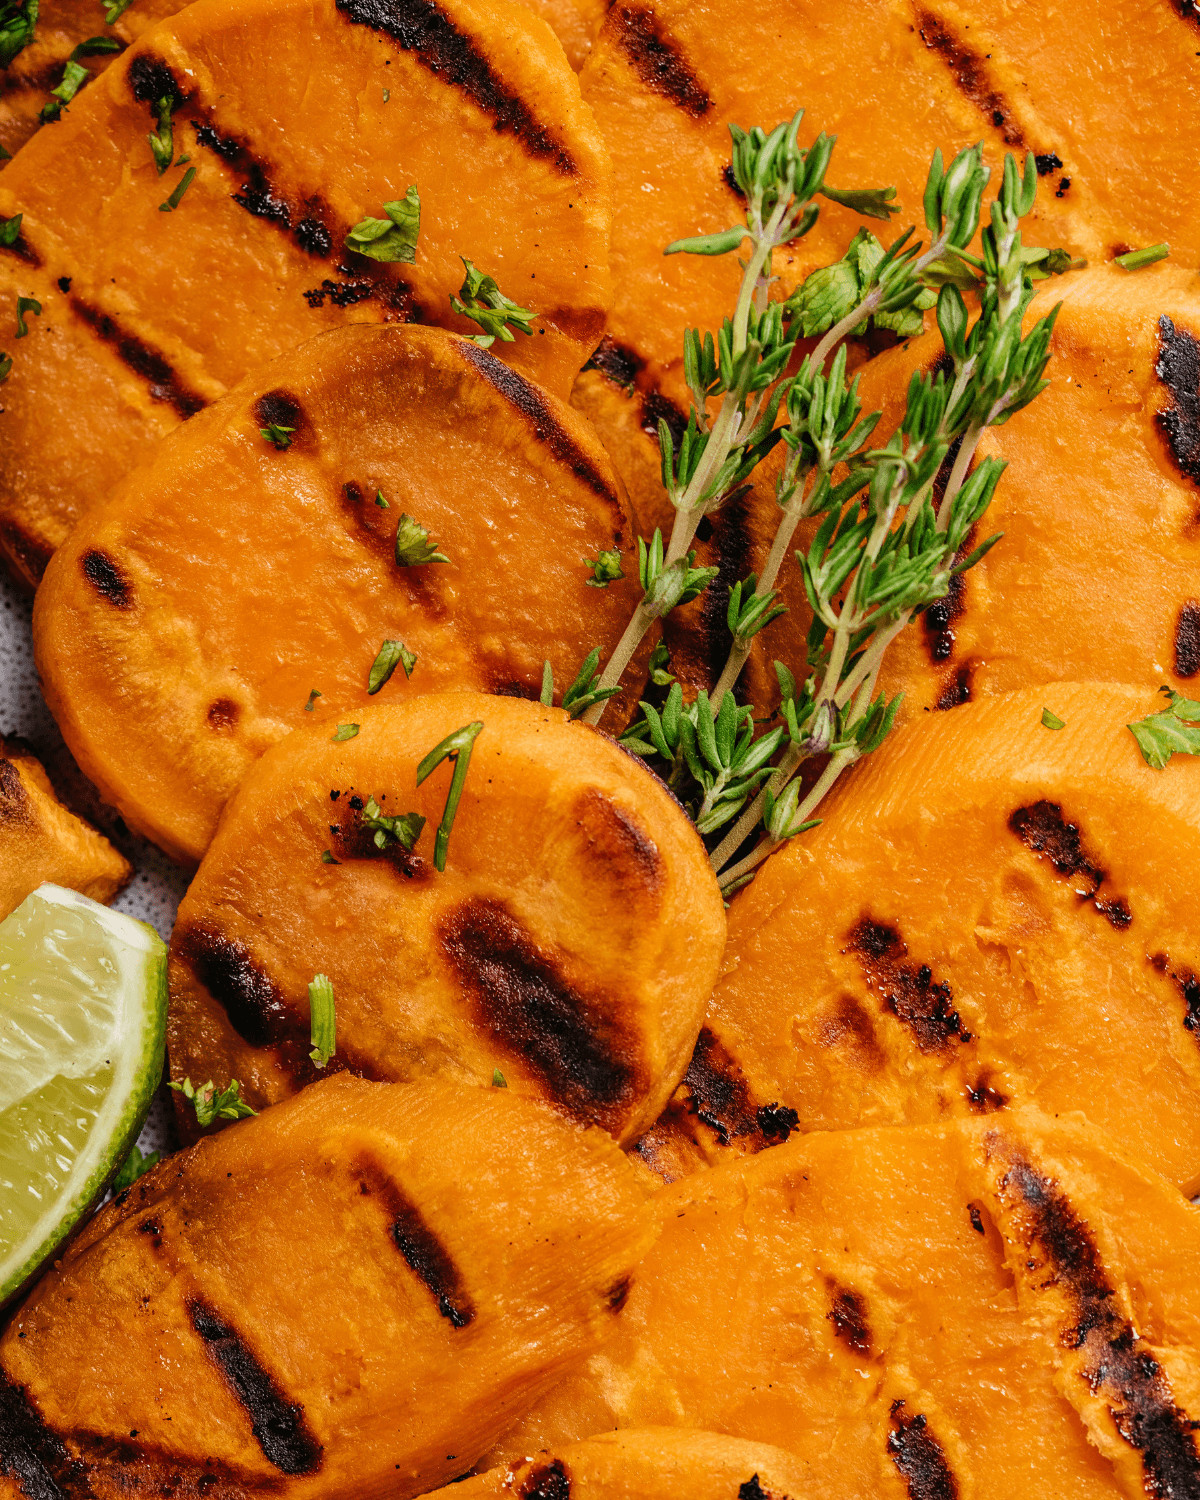 A closeup on the slices of sweet potatoes on the grill with grill marks.